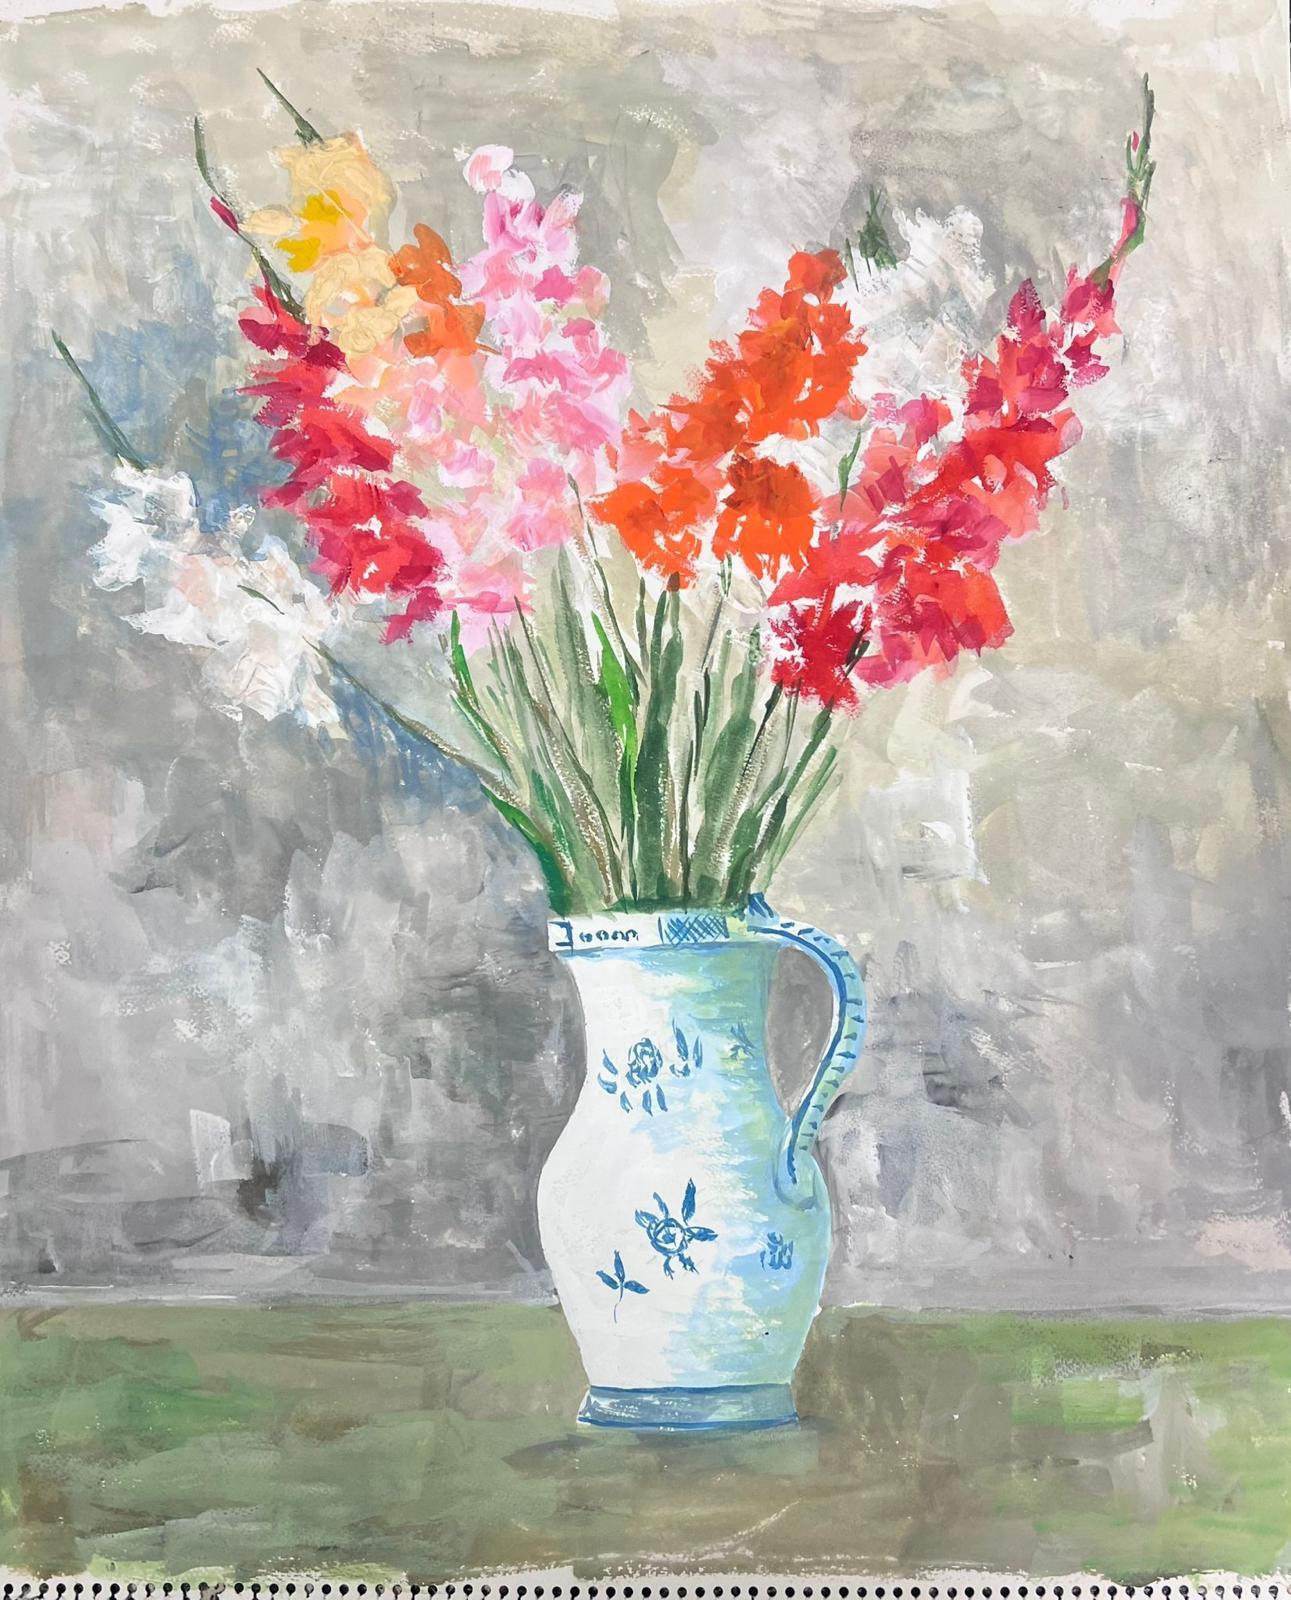 Gladioli Flowers
by Bernard Labbe (French mid 20th century)
original watercolour on artist paper
size: 18 x 15 inches
condition: very good and ready to be enjoyed

provenance: the artists atelier/ studio, France (stamped verso)